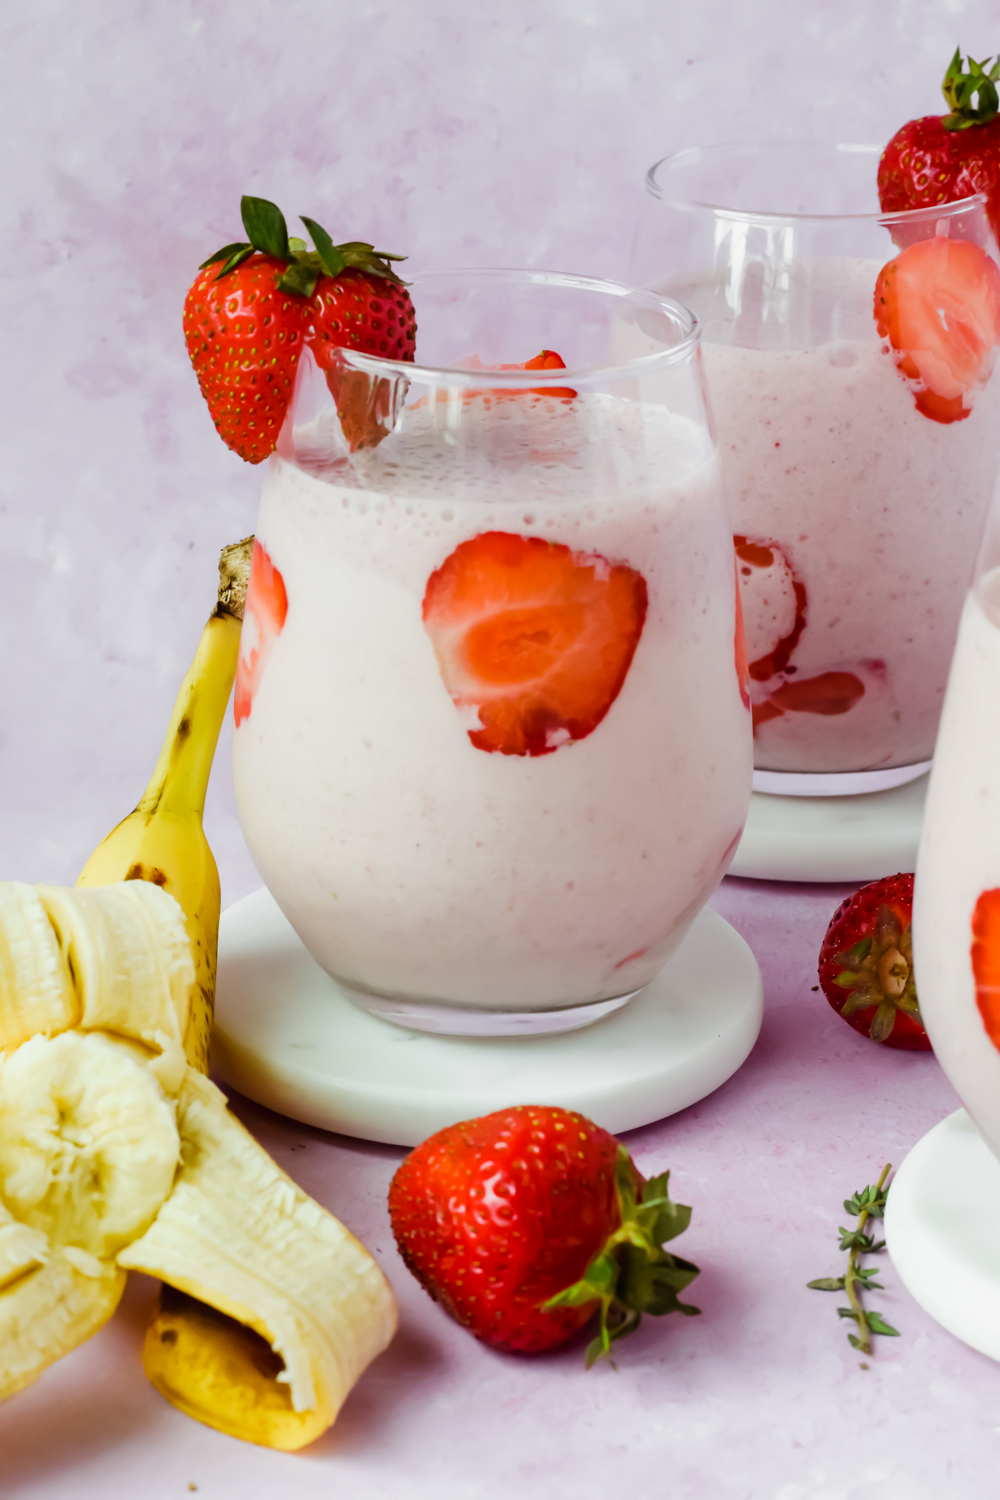 glass filled with strawberry banana protein smoothie with strawberry slices lining the glass.